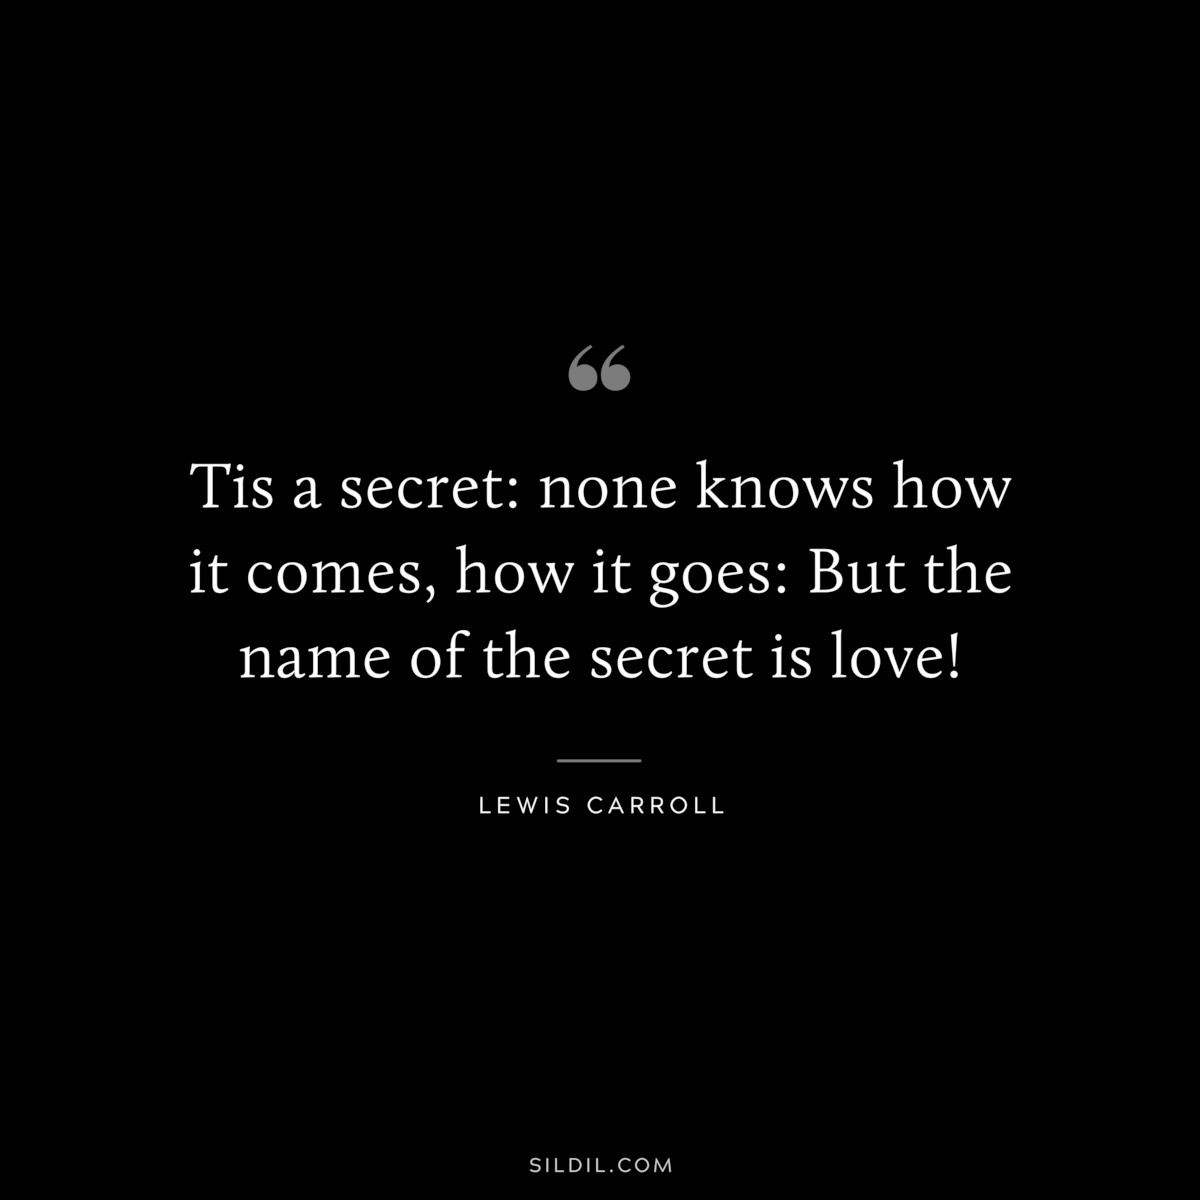 Tis a secret: none knows how it comes, how it goes: But the name of the secret is love!